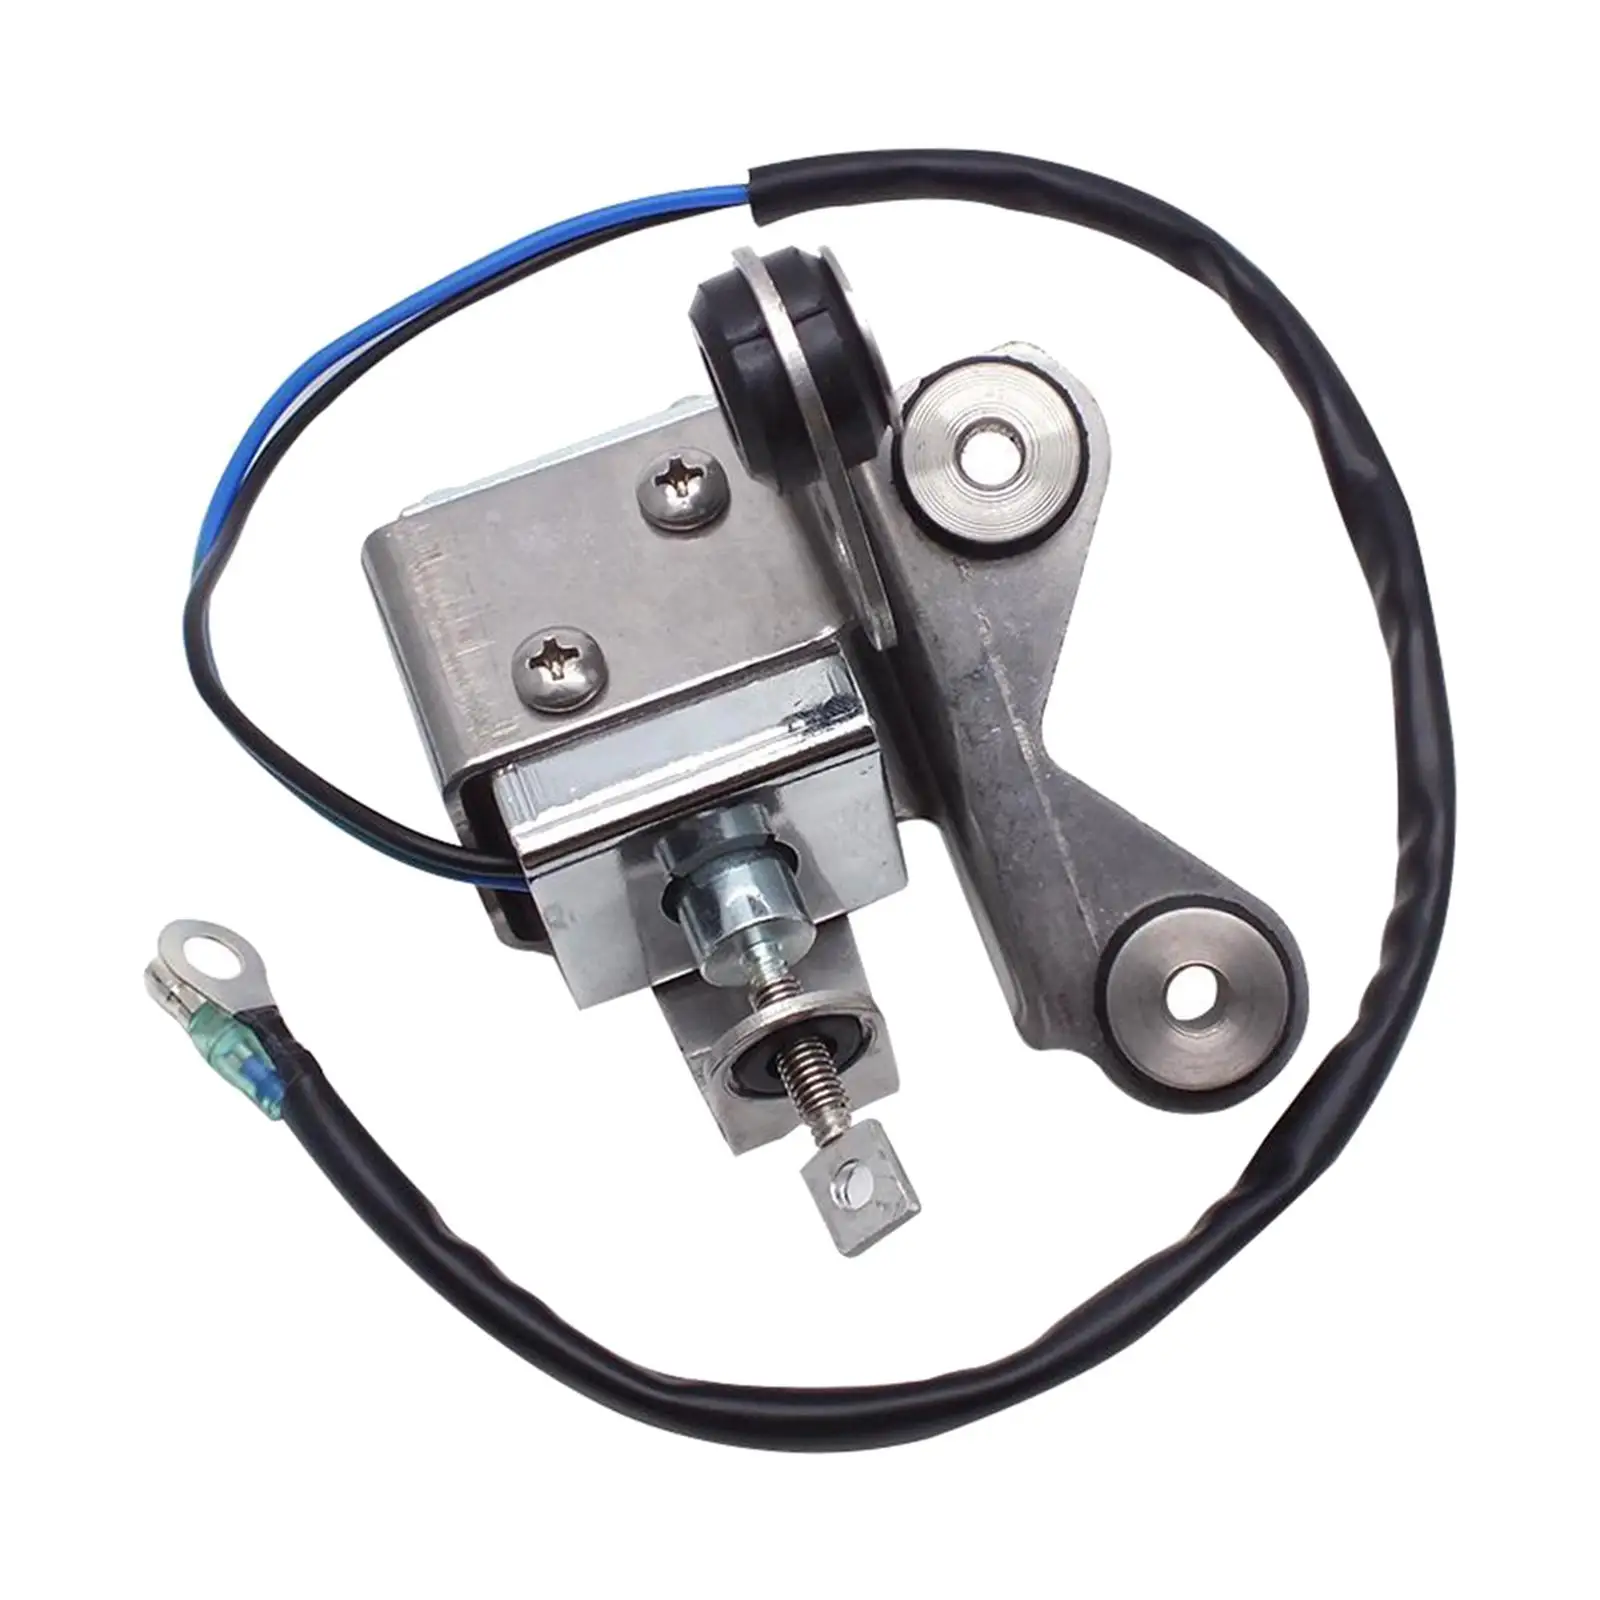 6J4-86111-00 Solenoid Coil Replaces for Yamaha Outboard 2T 40HP Spare Parts